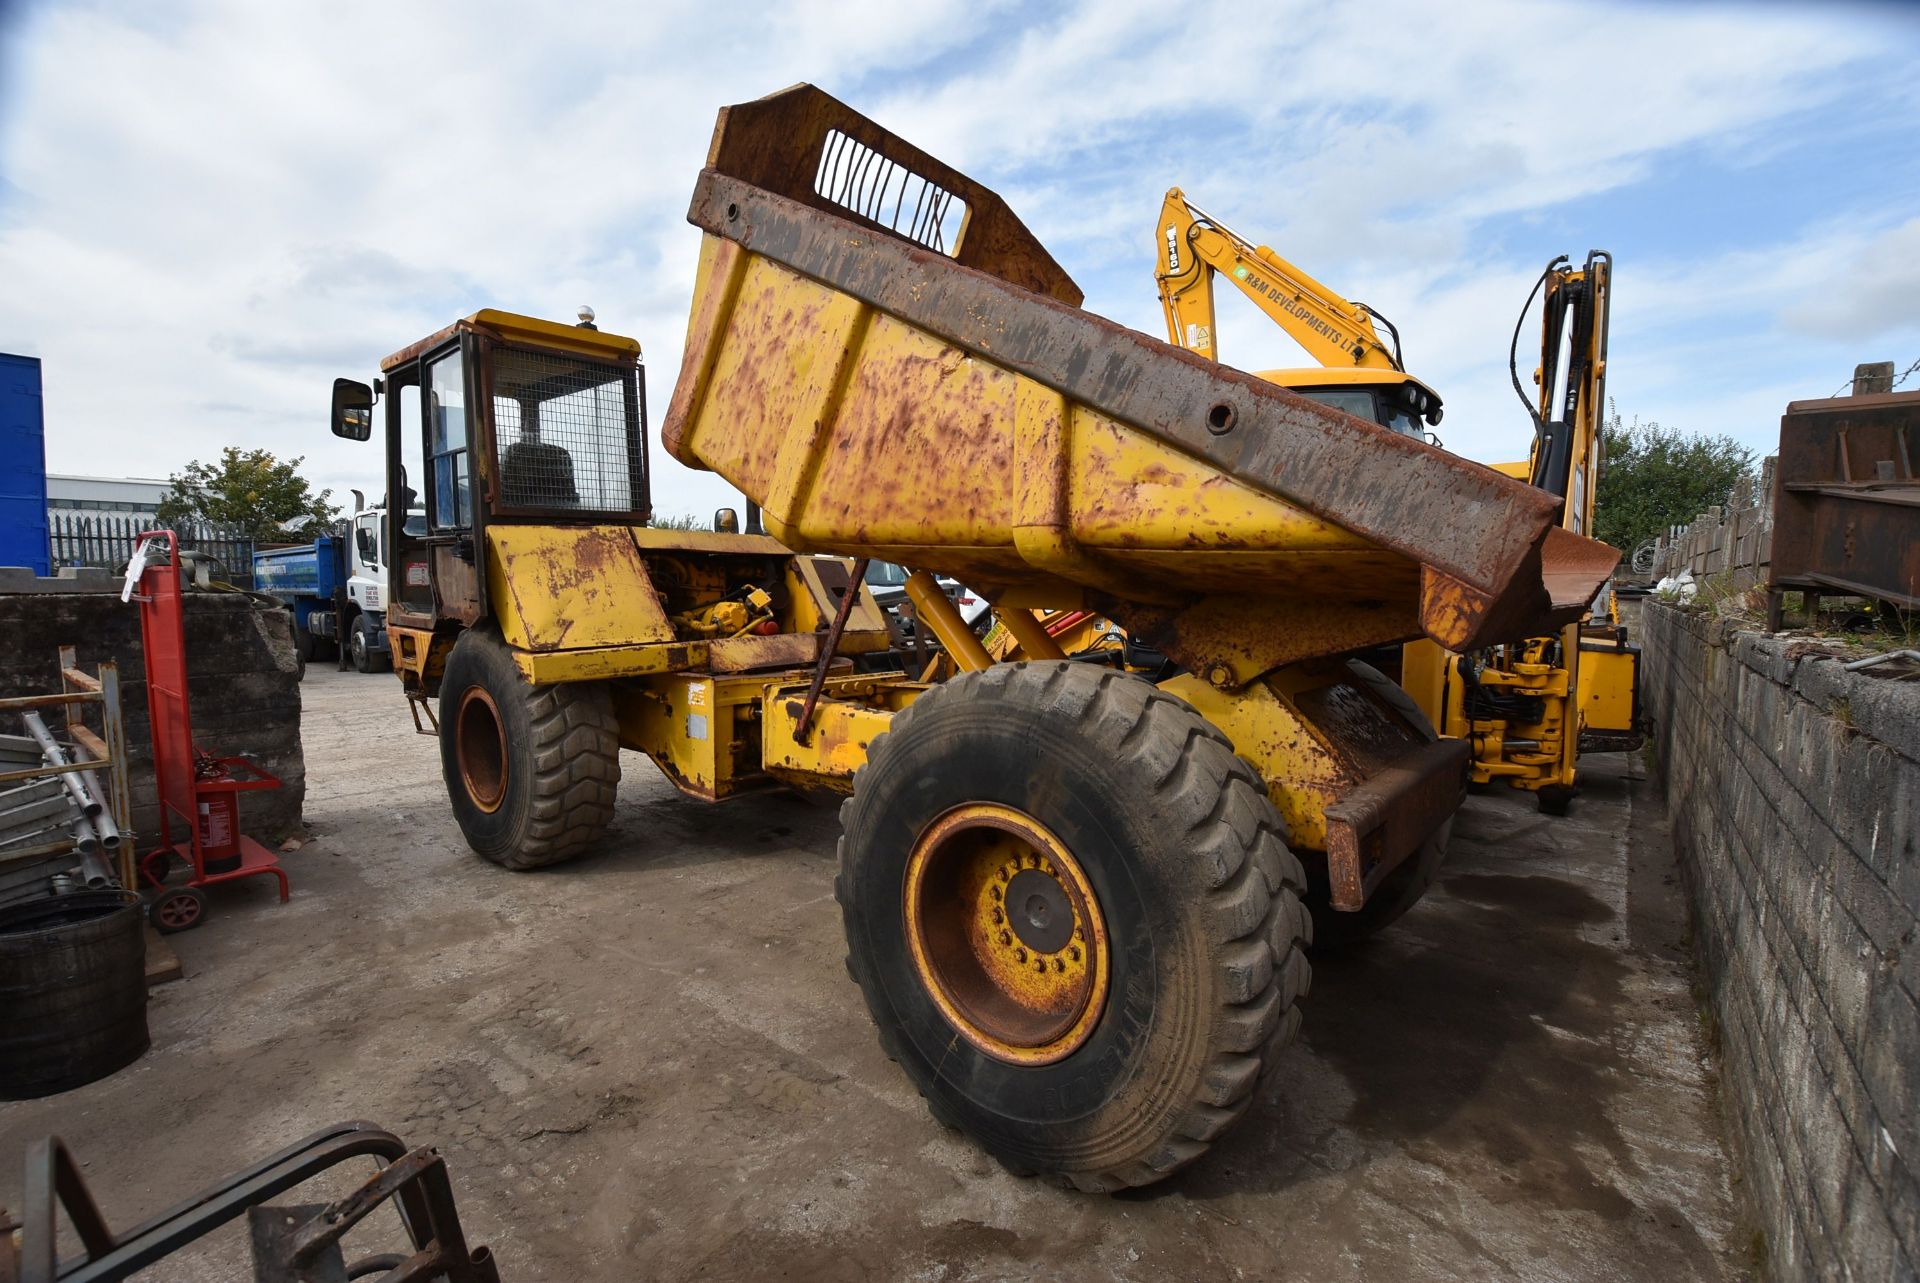 JCB 712 ARTICULATED DUMP TRUCK, serial no. 810293S, 01188 indicated hours (at time of listing) ( - Image 4 of 11